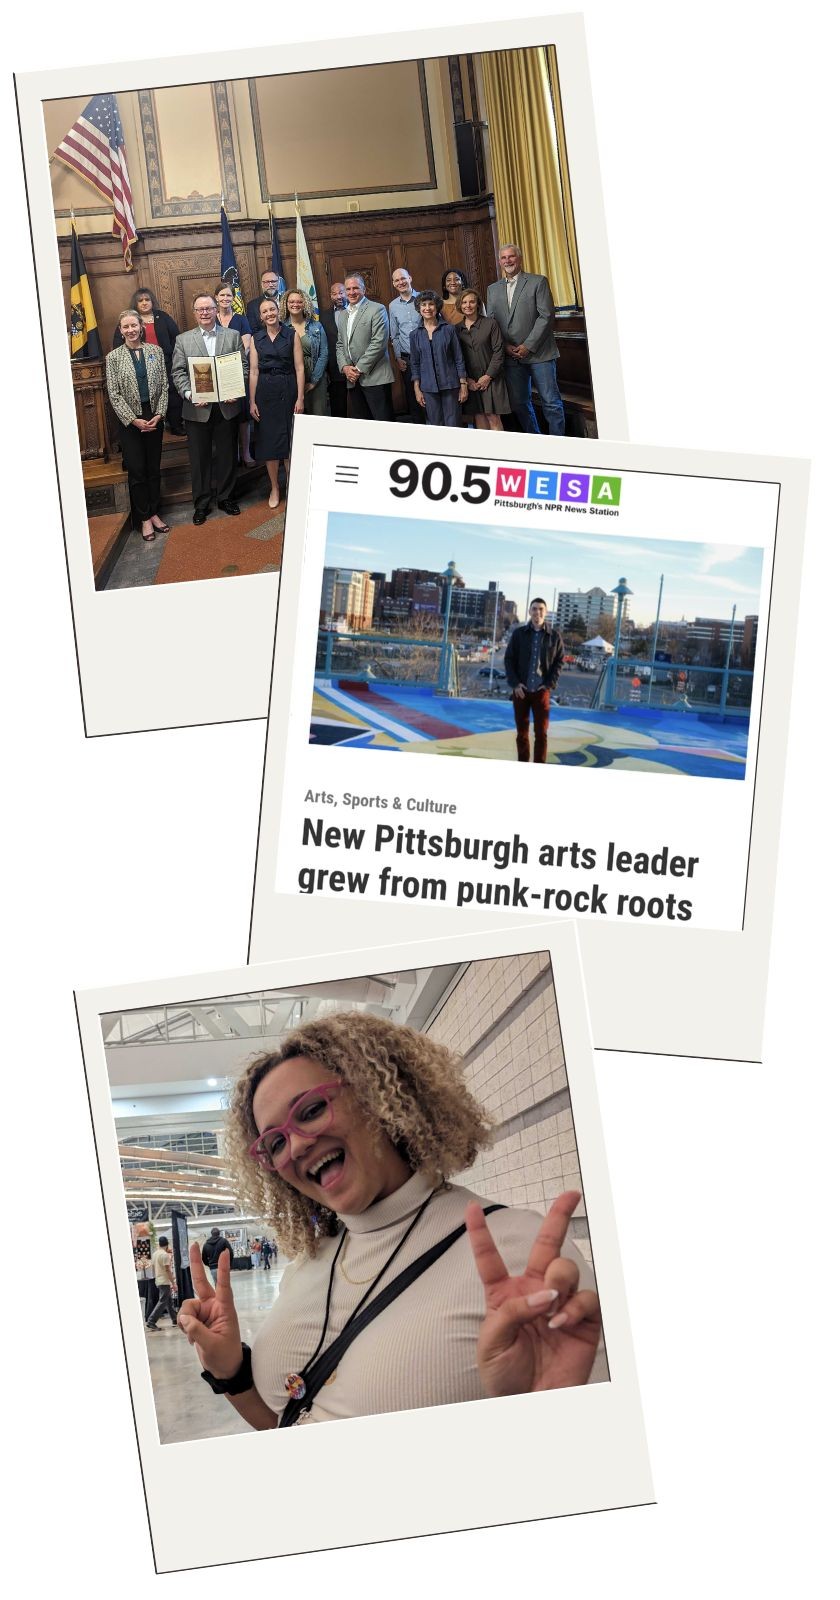 Three polaroids. On top, a group of people stand smiling while a man holds up a city proclamation. The second photo shows a screencap of a WESA article with a photo of a white smiling man and the words "New Pittsburgh arts leader grew from punk-rock roots". The third shows a smiling Black woman with pink glasses and short curly light brown hair holding up peace signs with her fingers